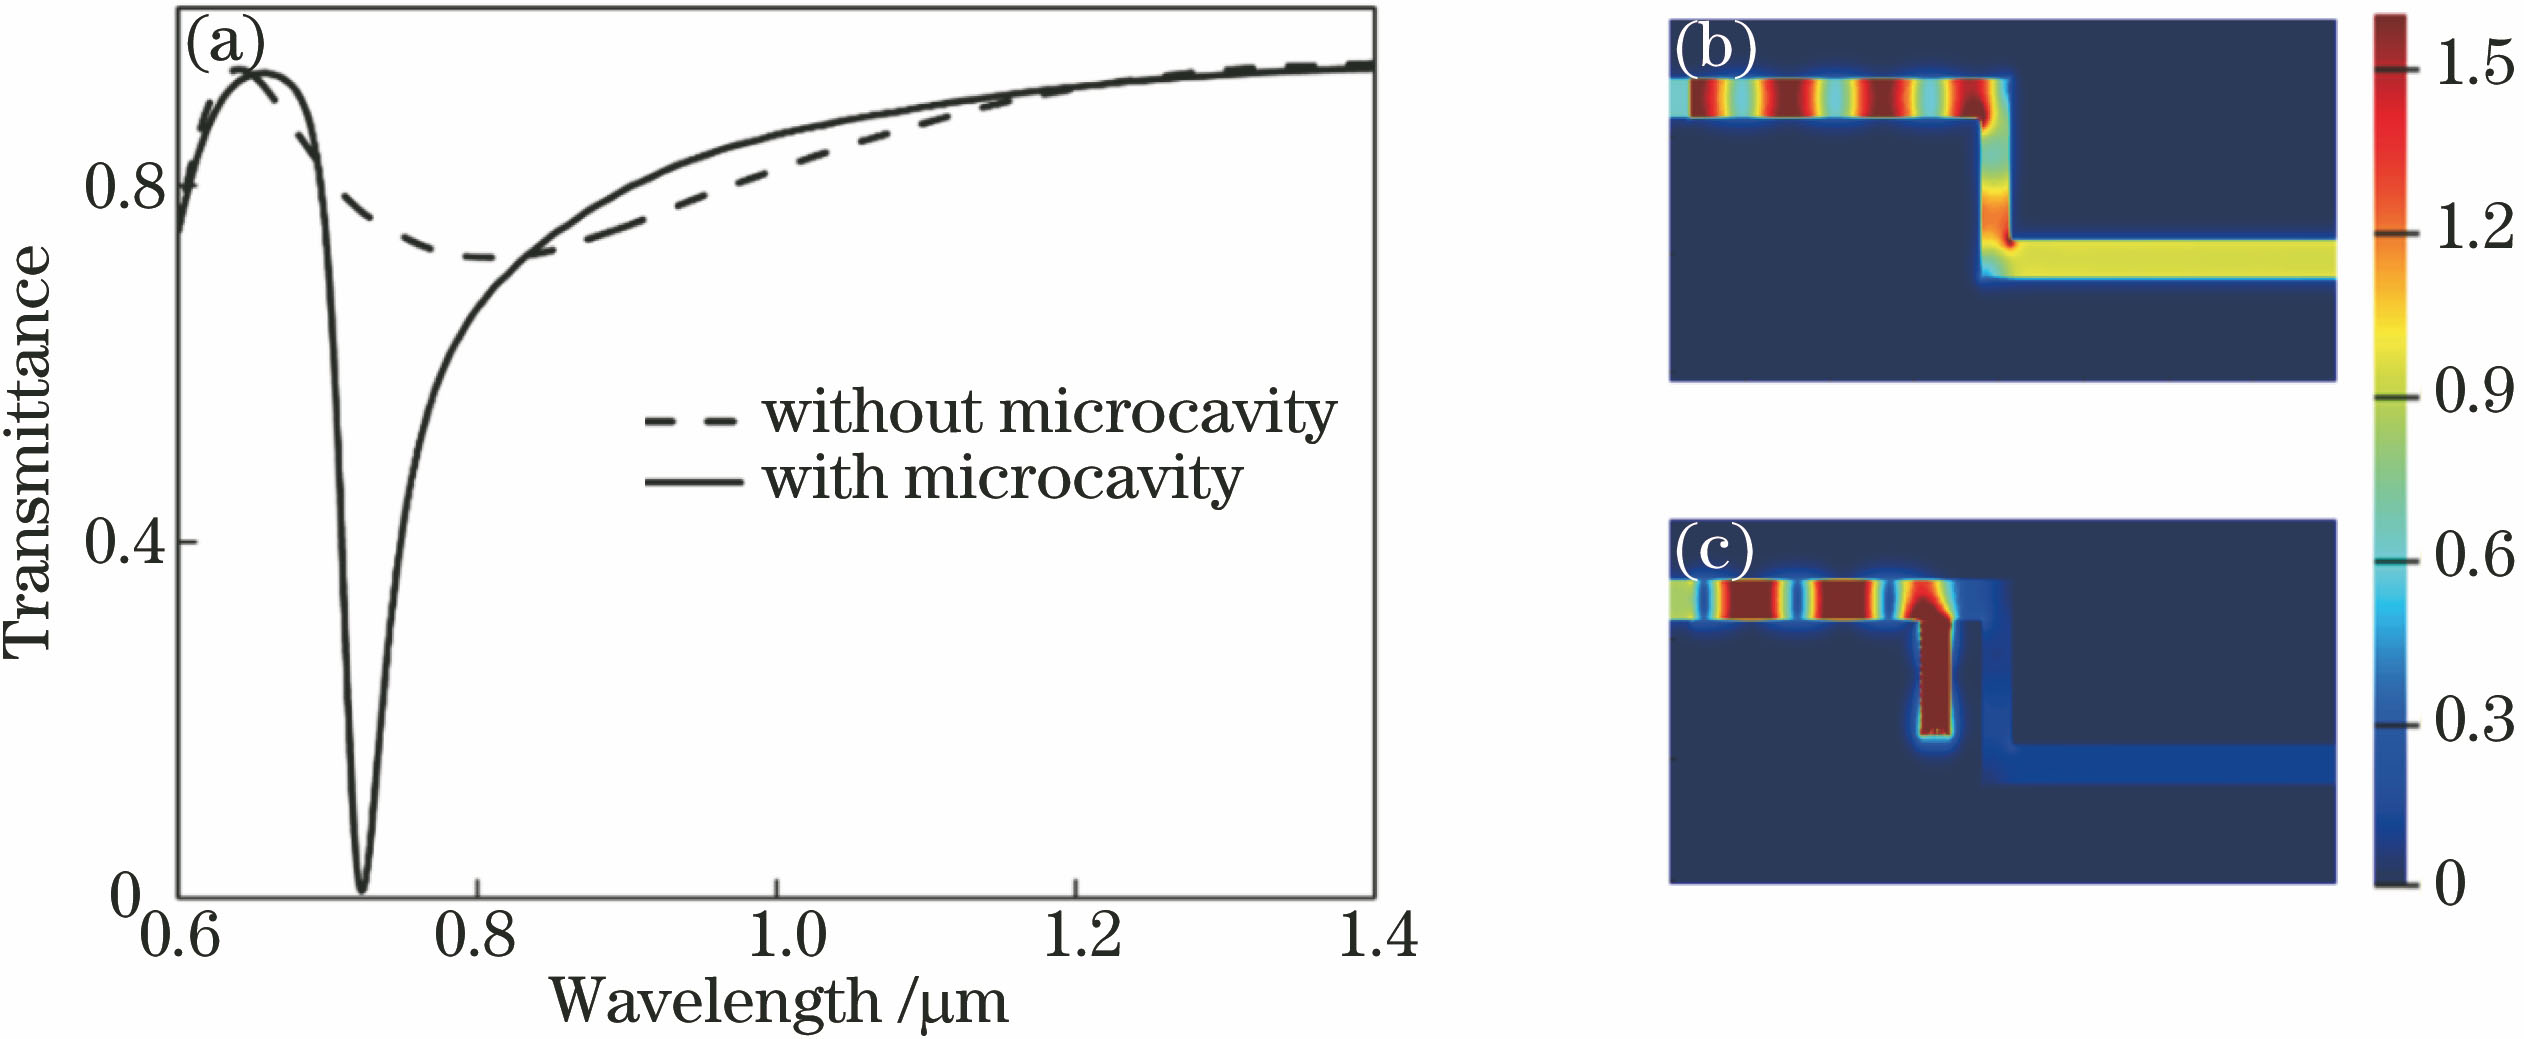 (a) Transmission spectrogram of filters with (solid line) and without (dotted line) microcavity structures; electric field intensity distribution of the filter (b) without and (c) with resonant cavity